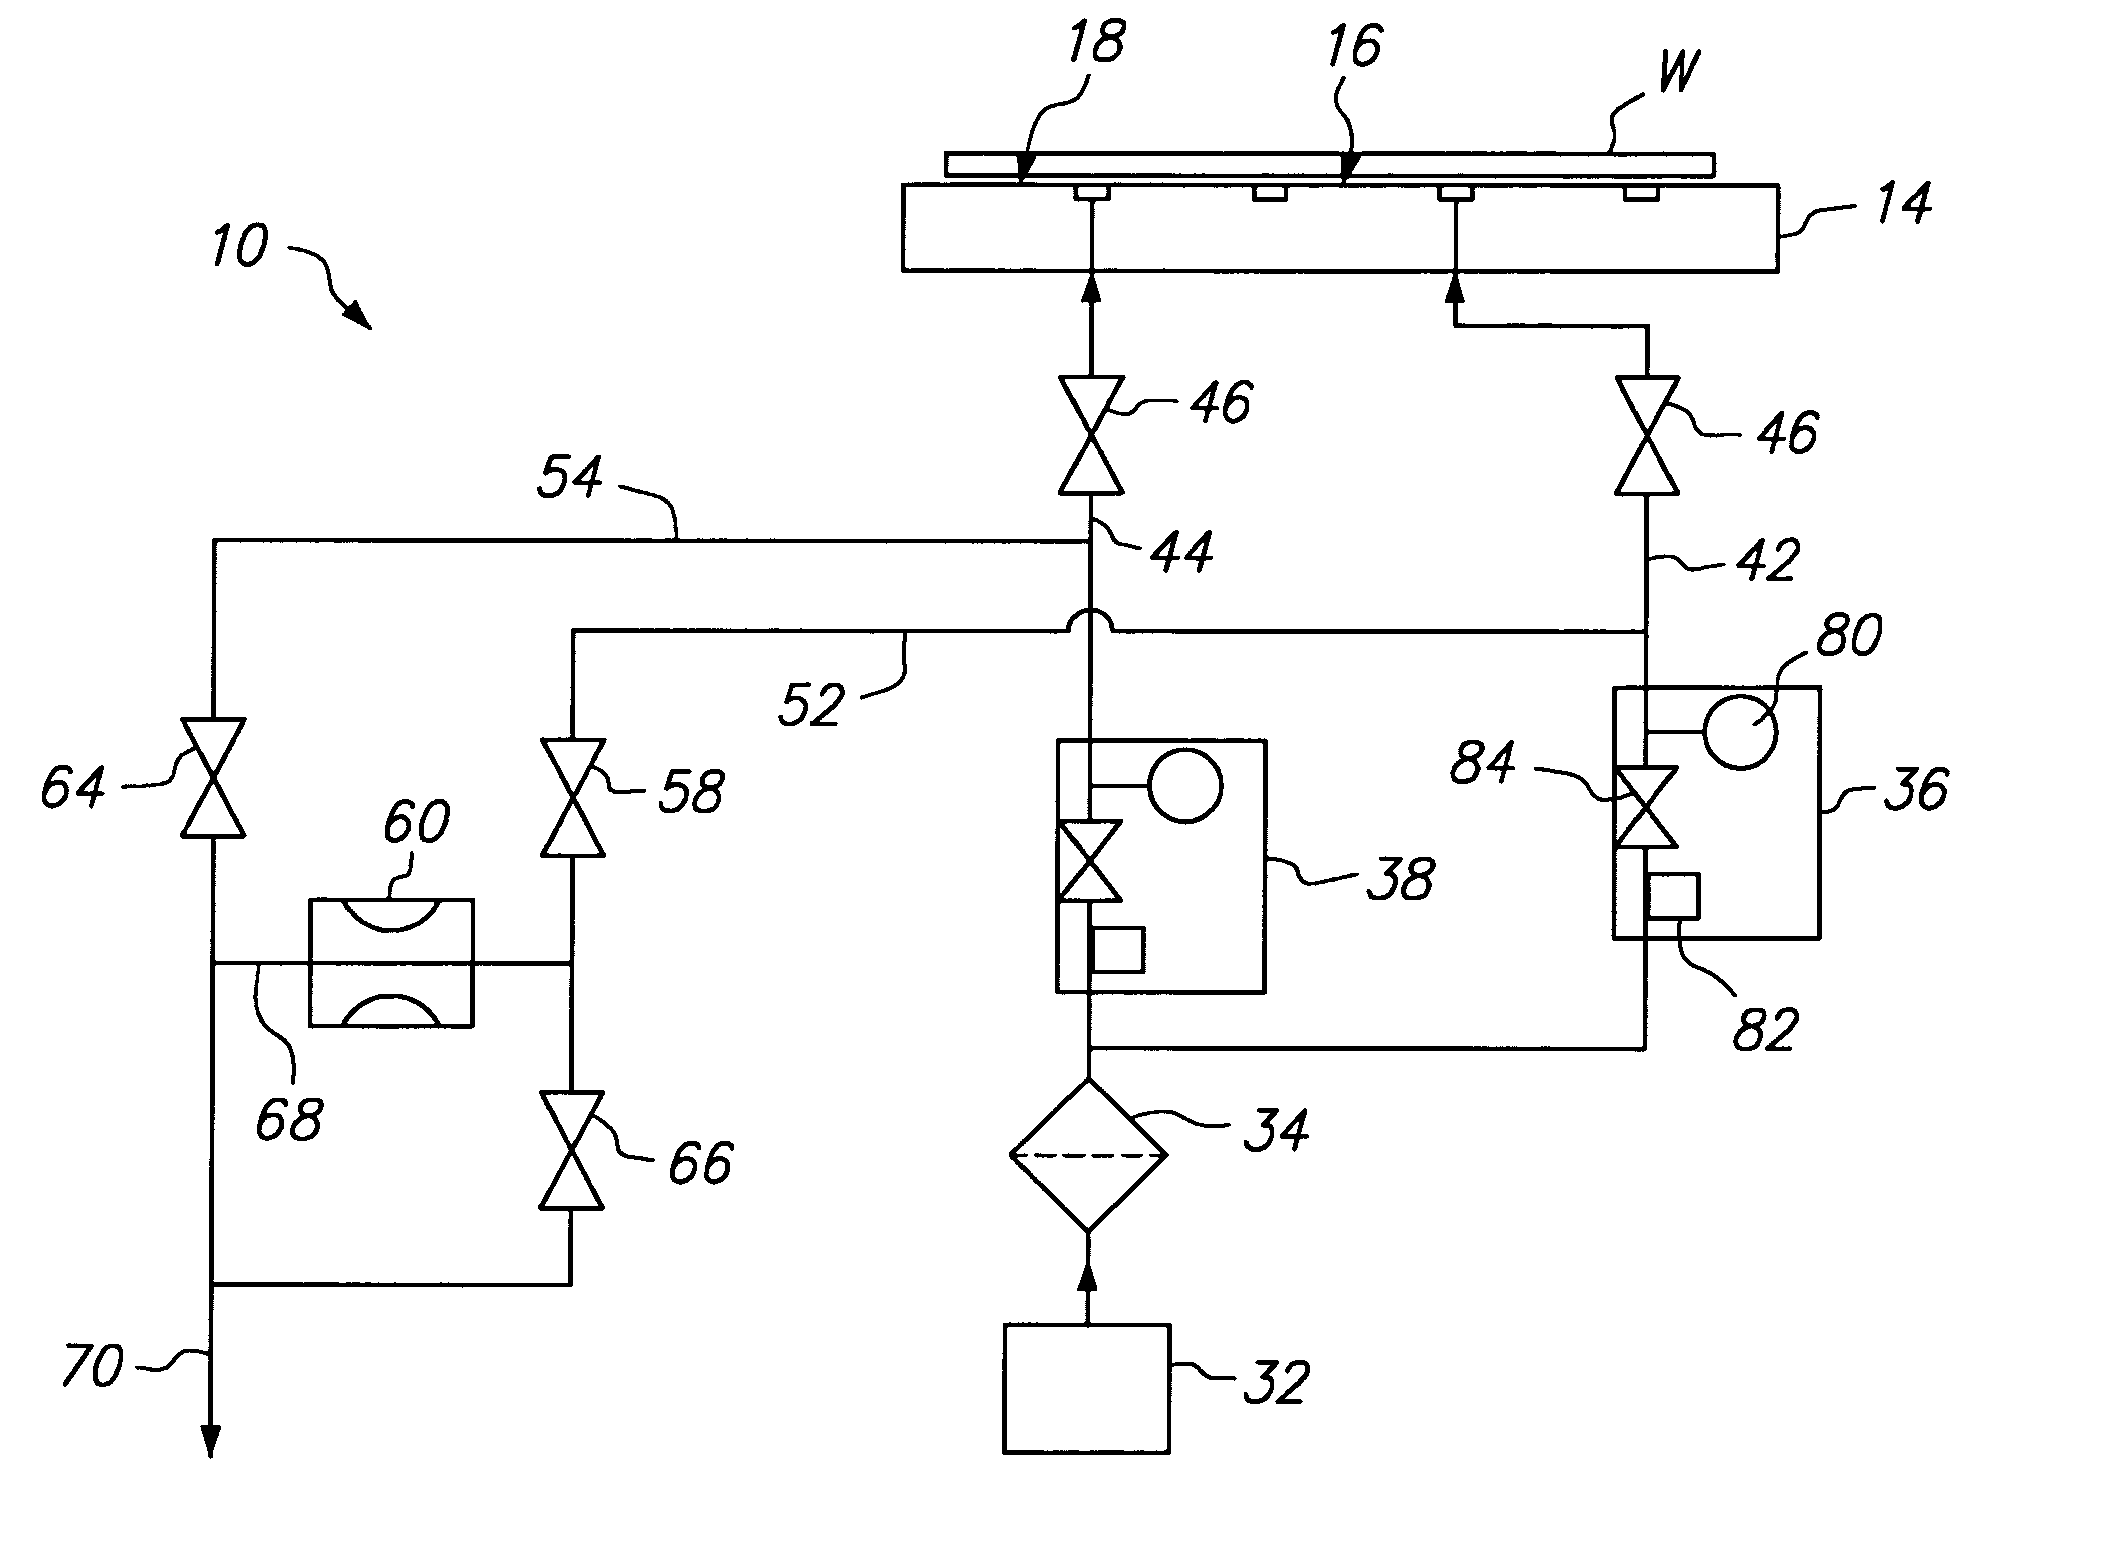 Multiple zone gas distribution apparatus for thermal control of semiconductor wafer